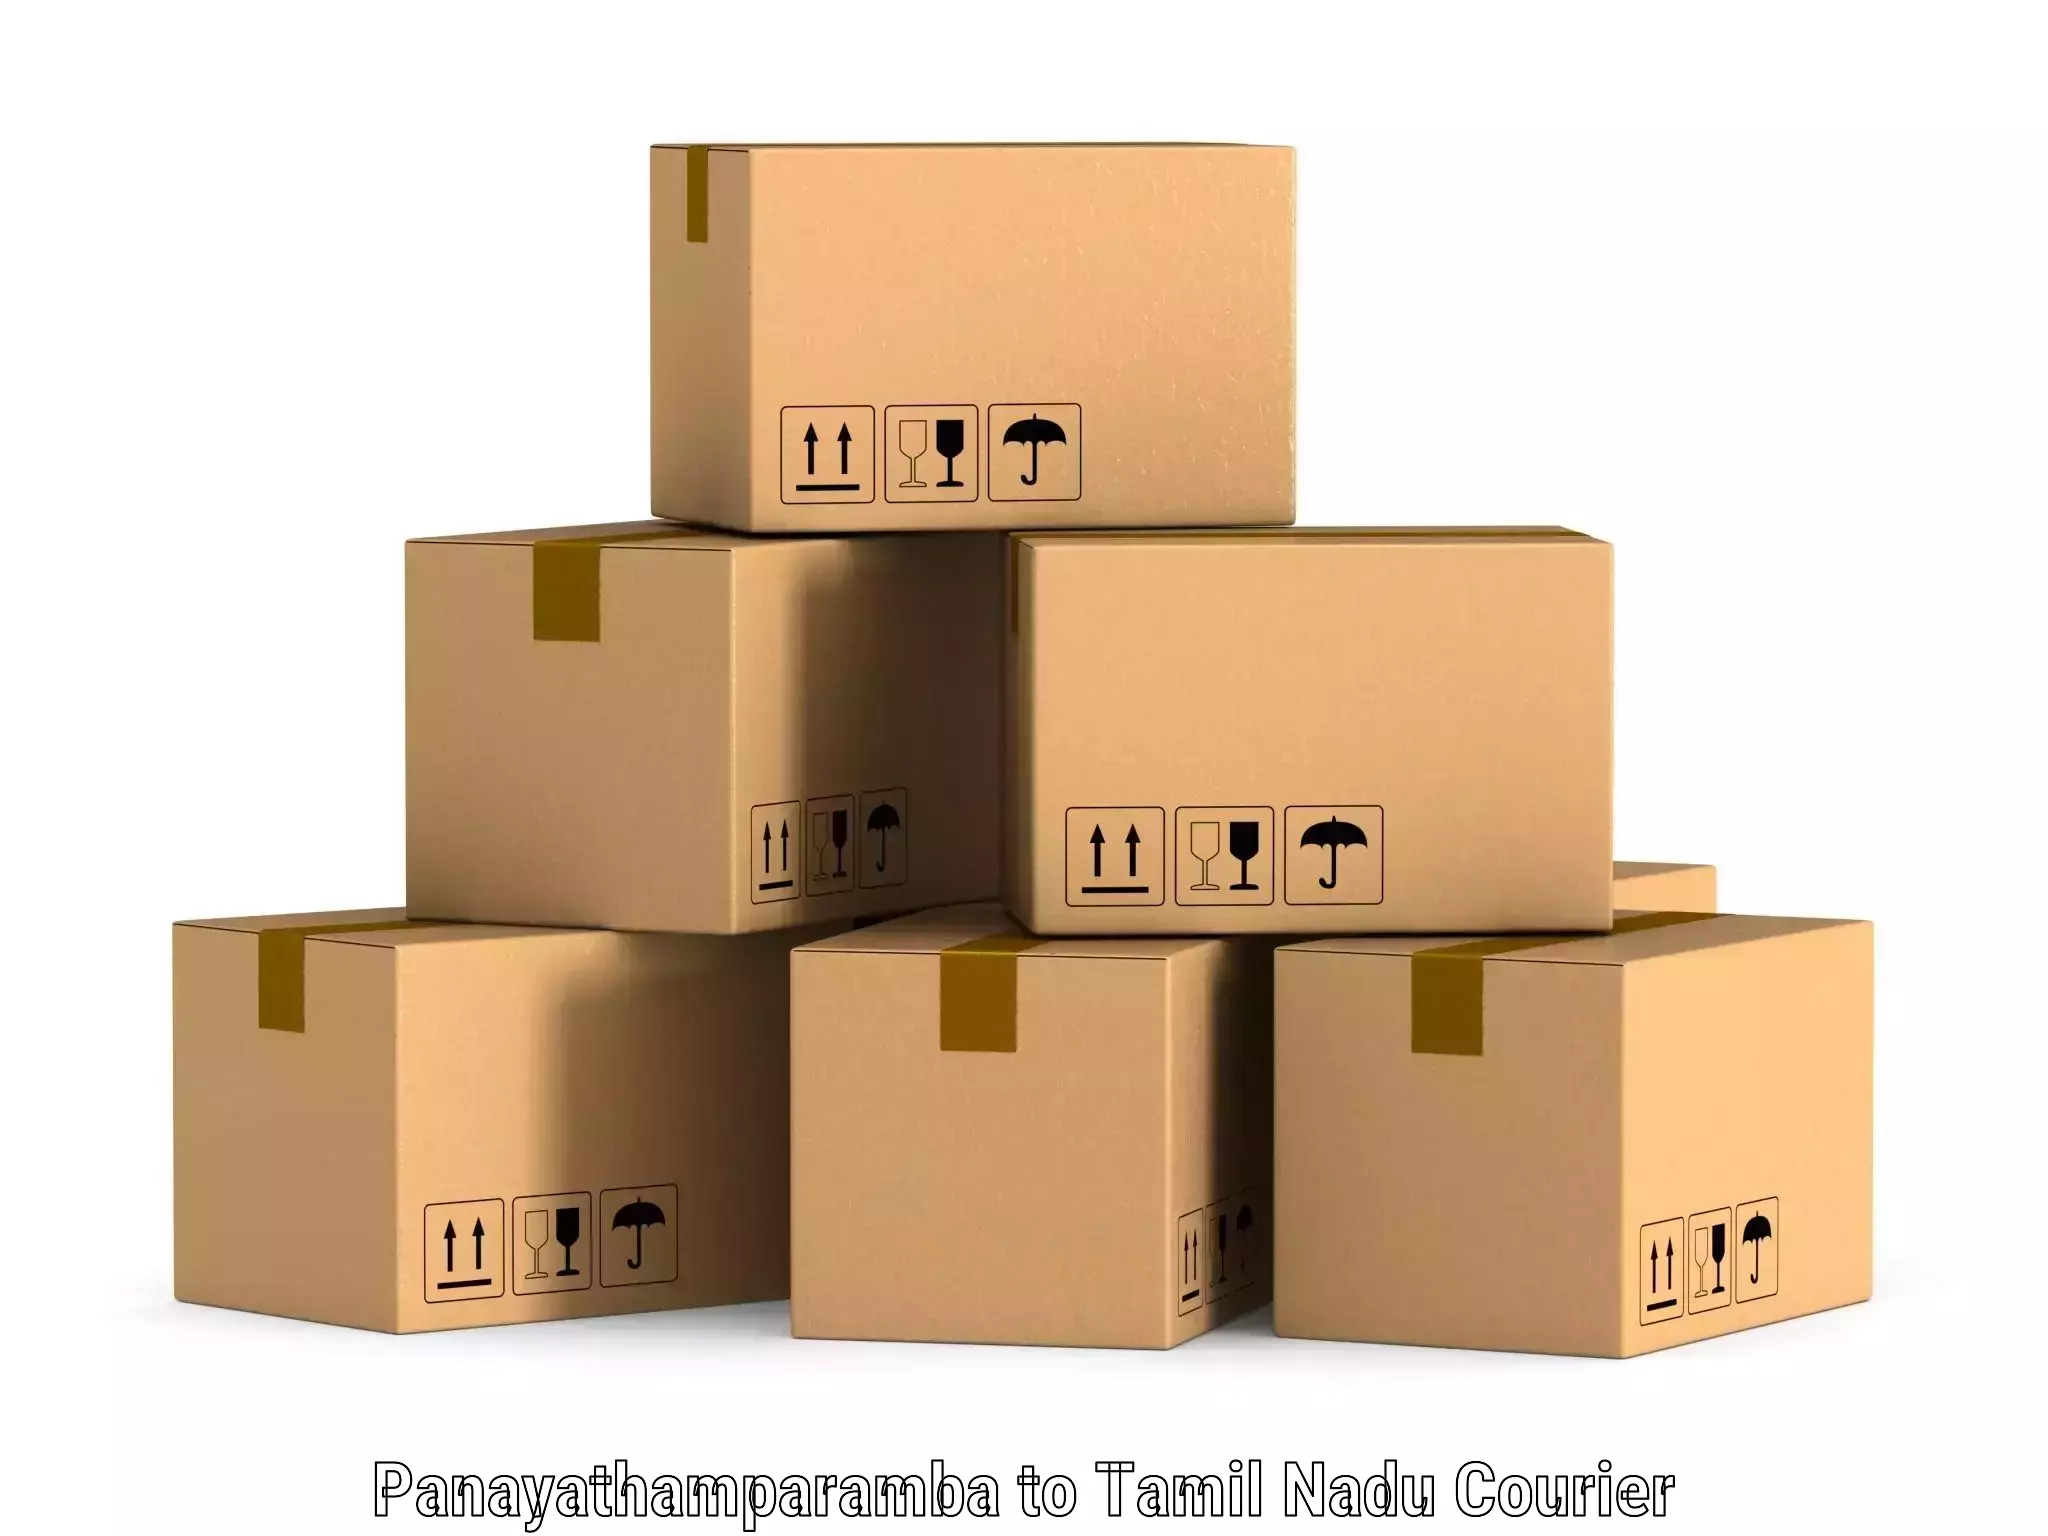 Reliable courier service Panayathamparamba to Vellore